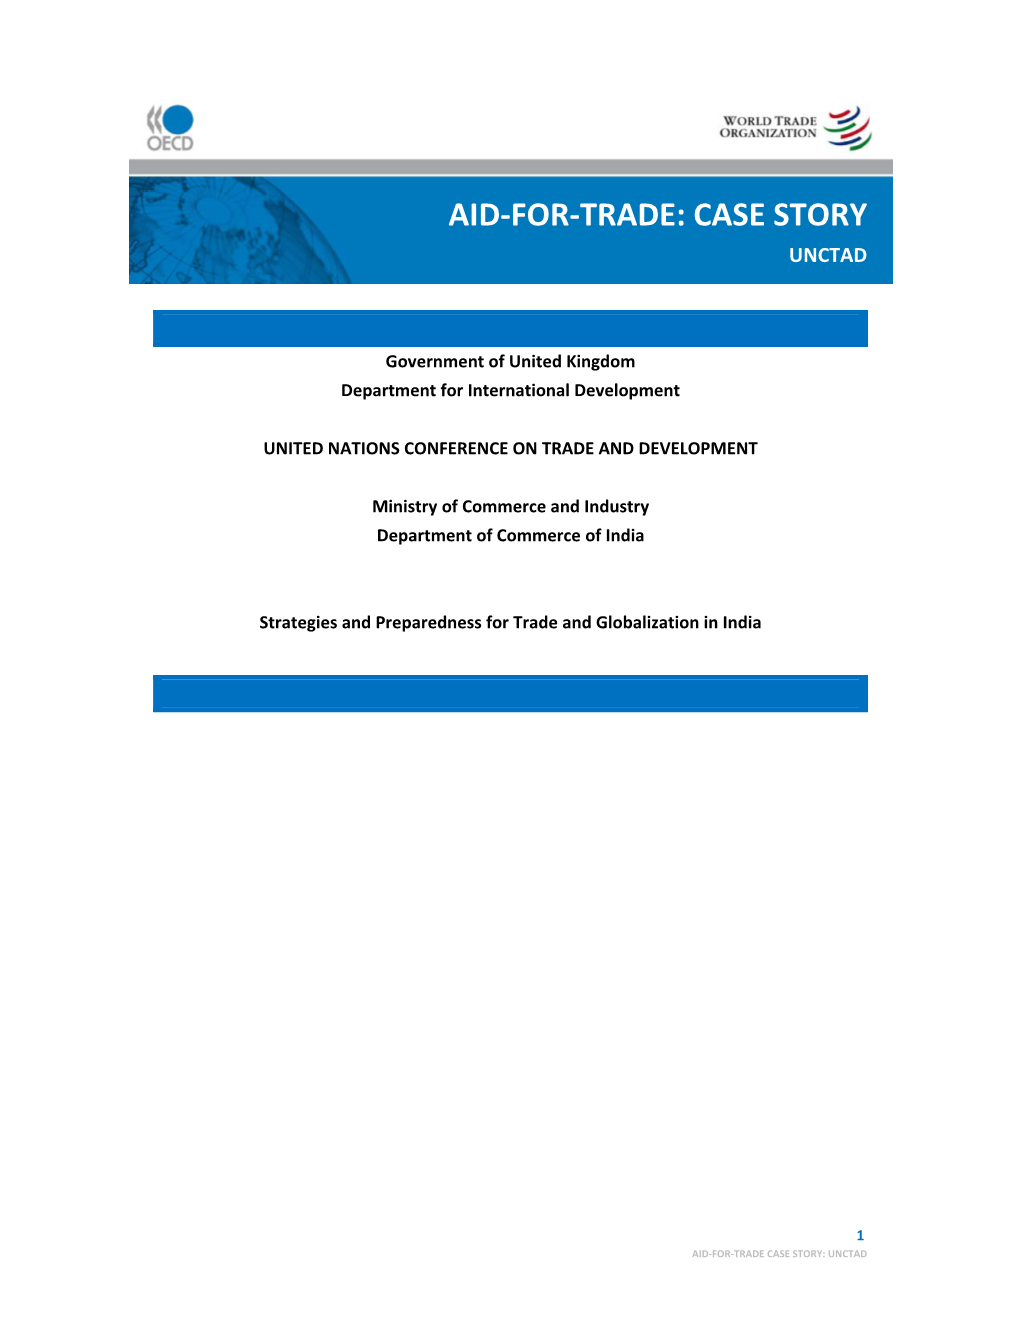 Strategies and Preparedness for Trade and Globalization in India